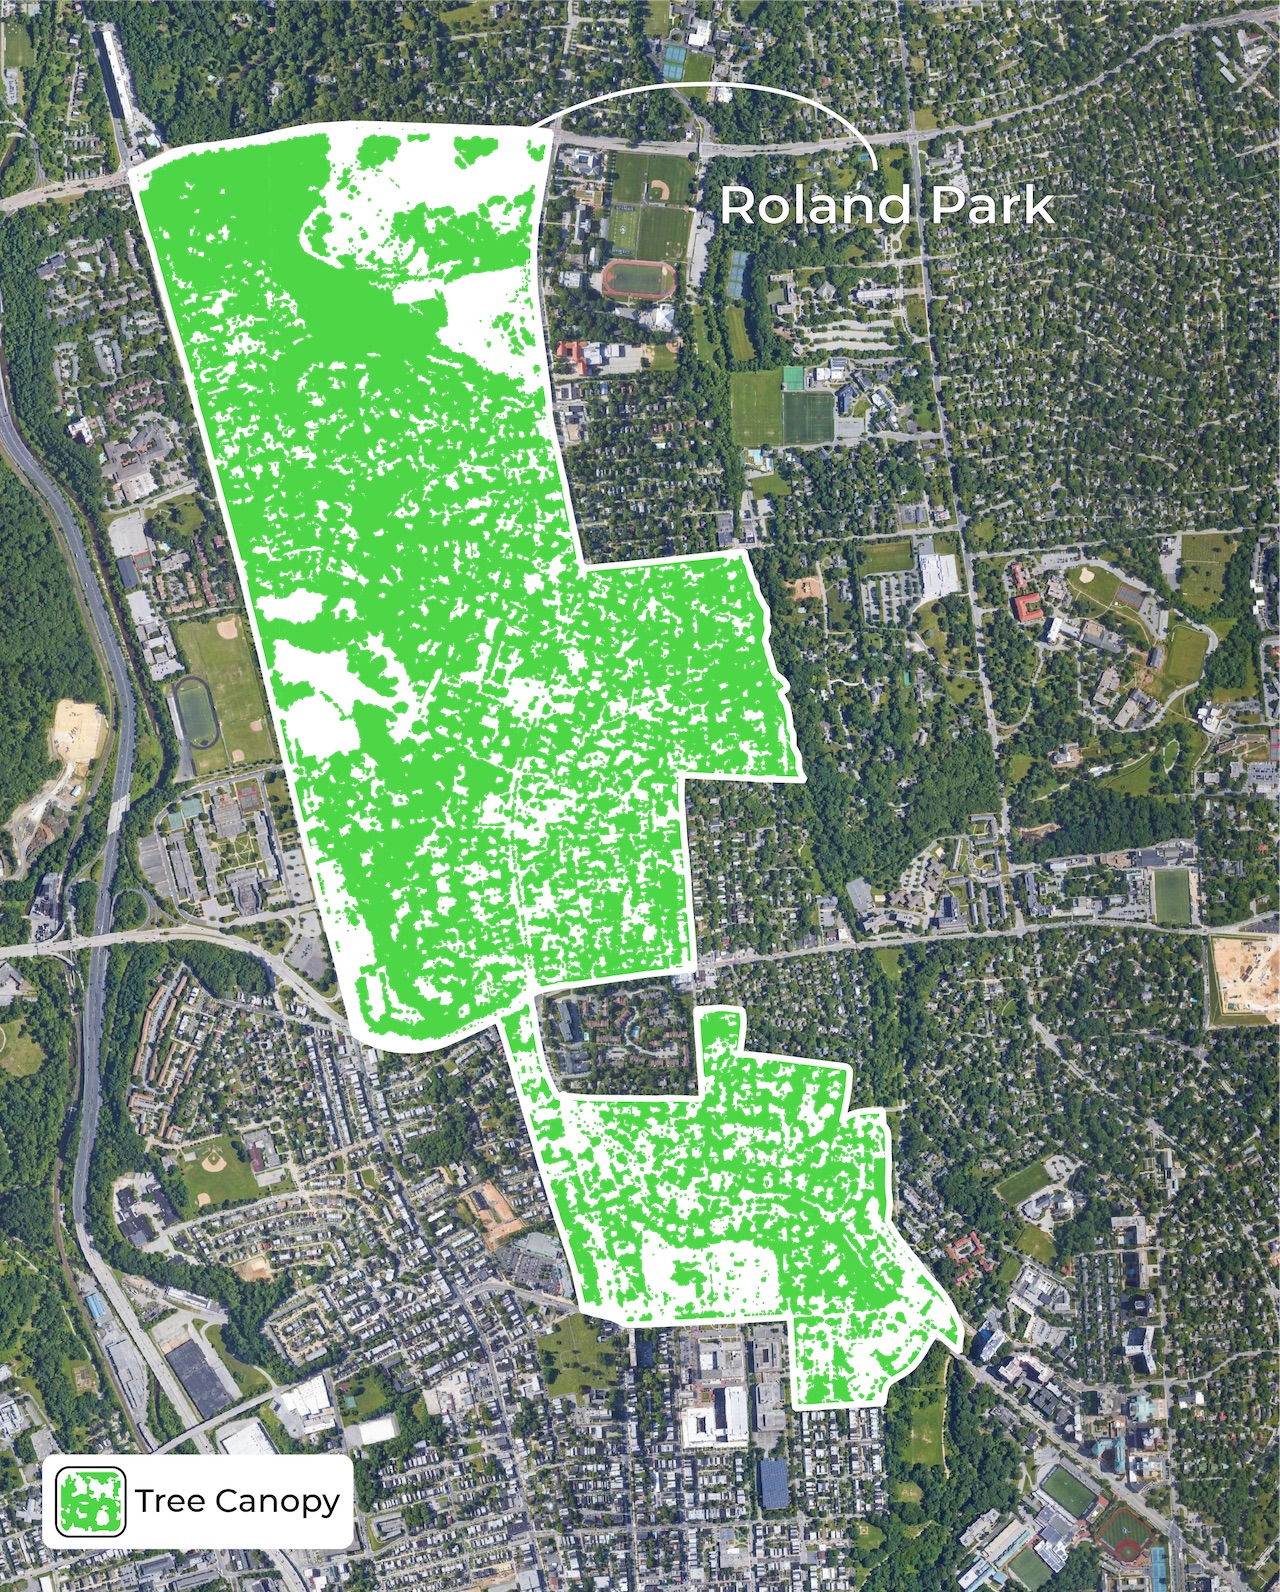 Within the outline of Roland Park, the satellite image has been replaced with green blotches indicating tree canopy.